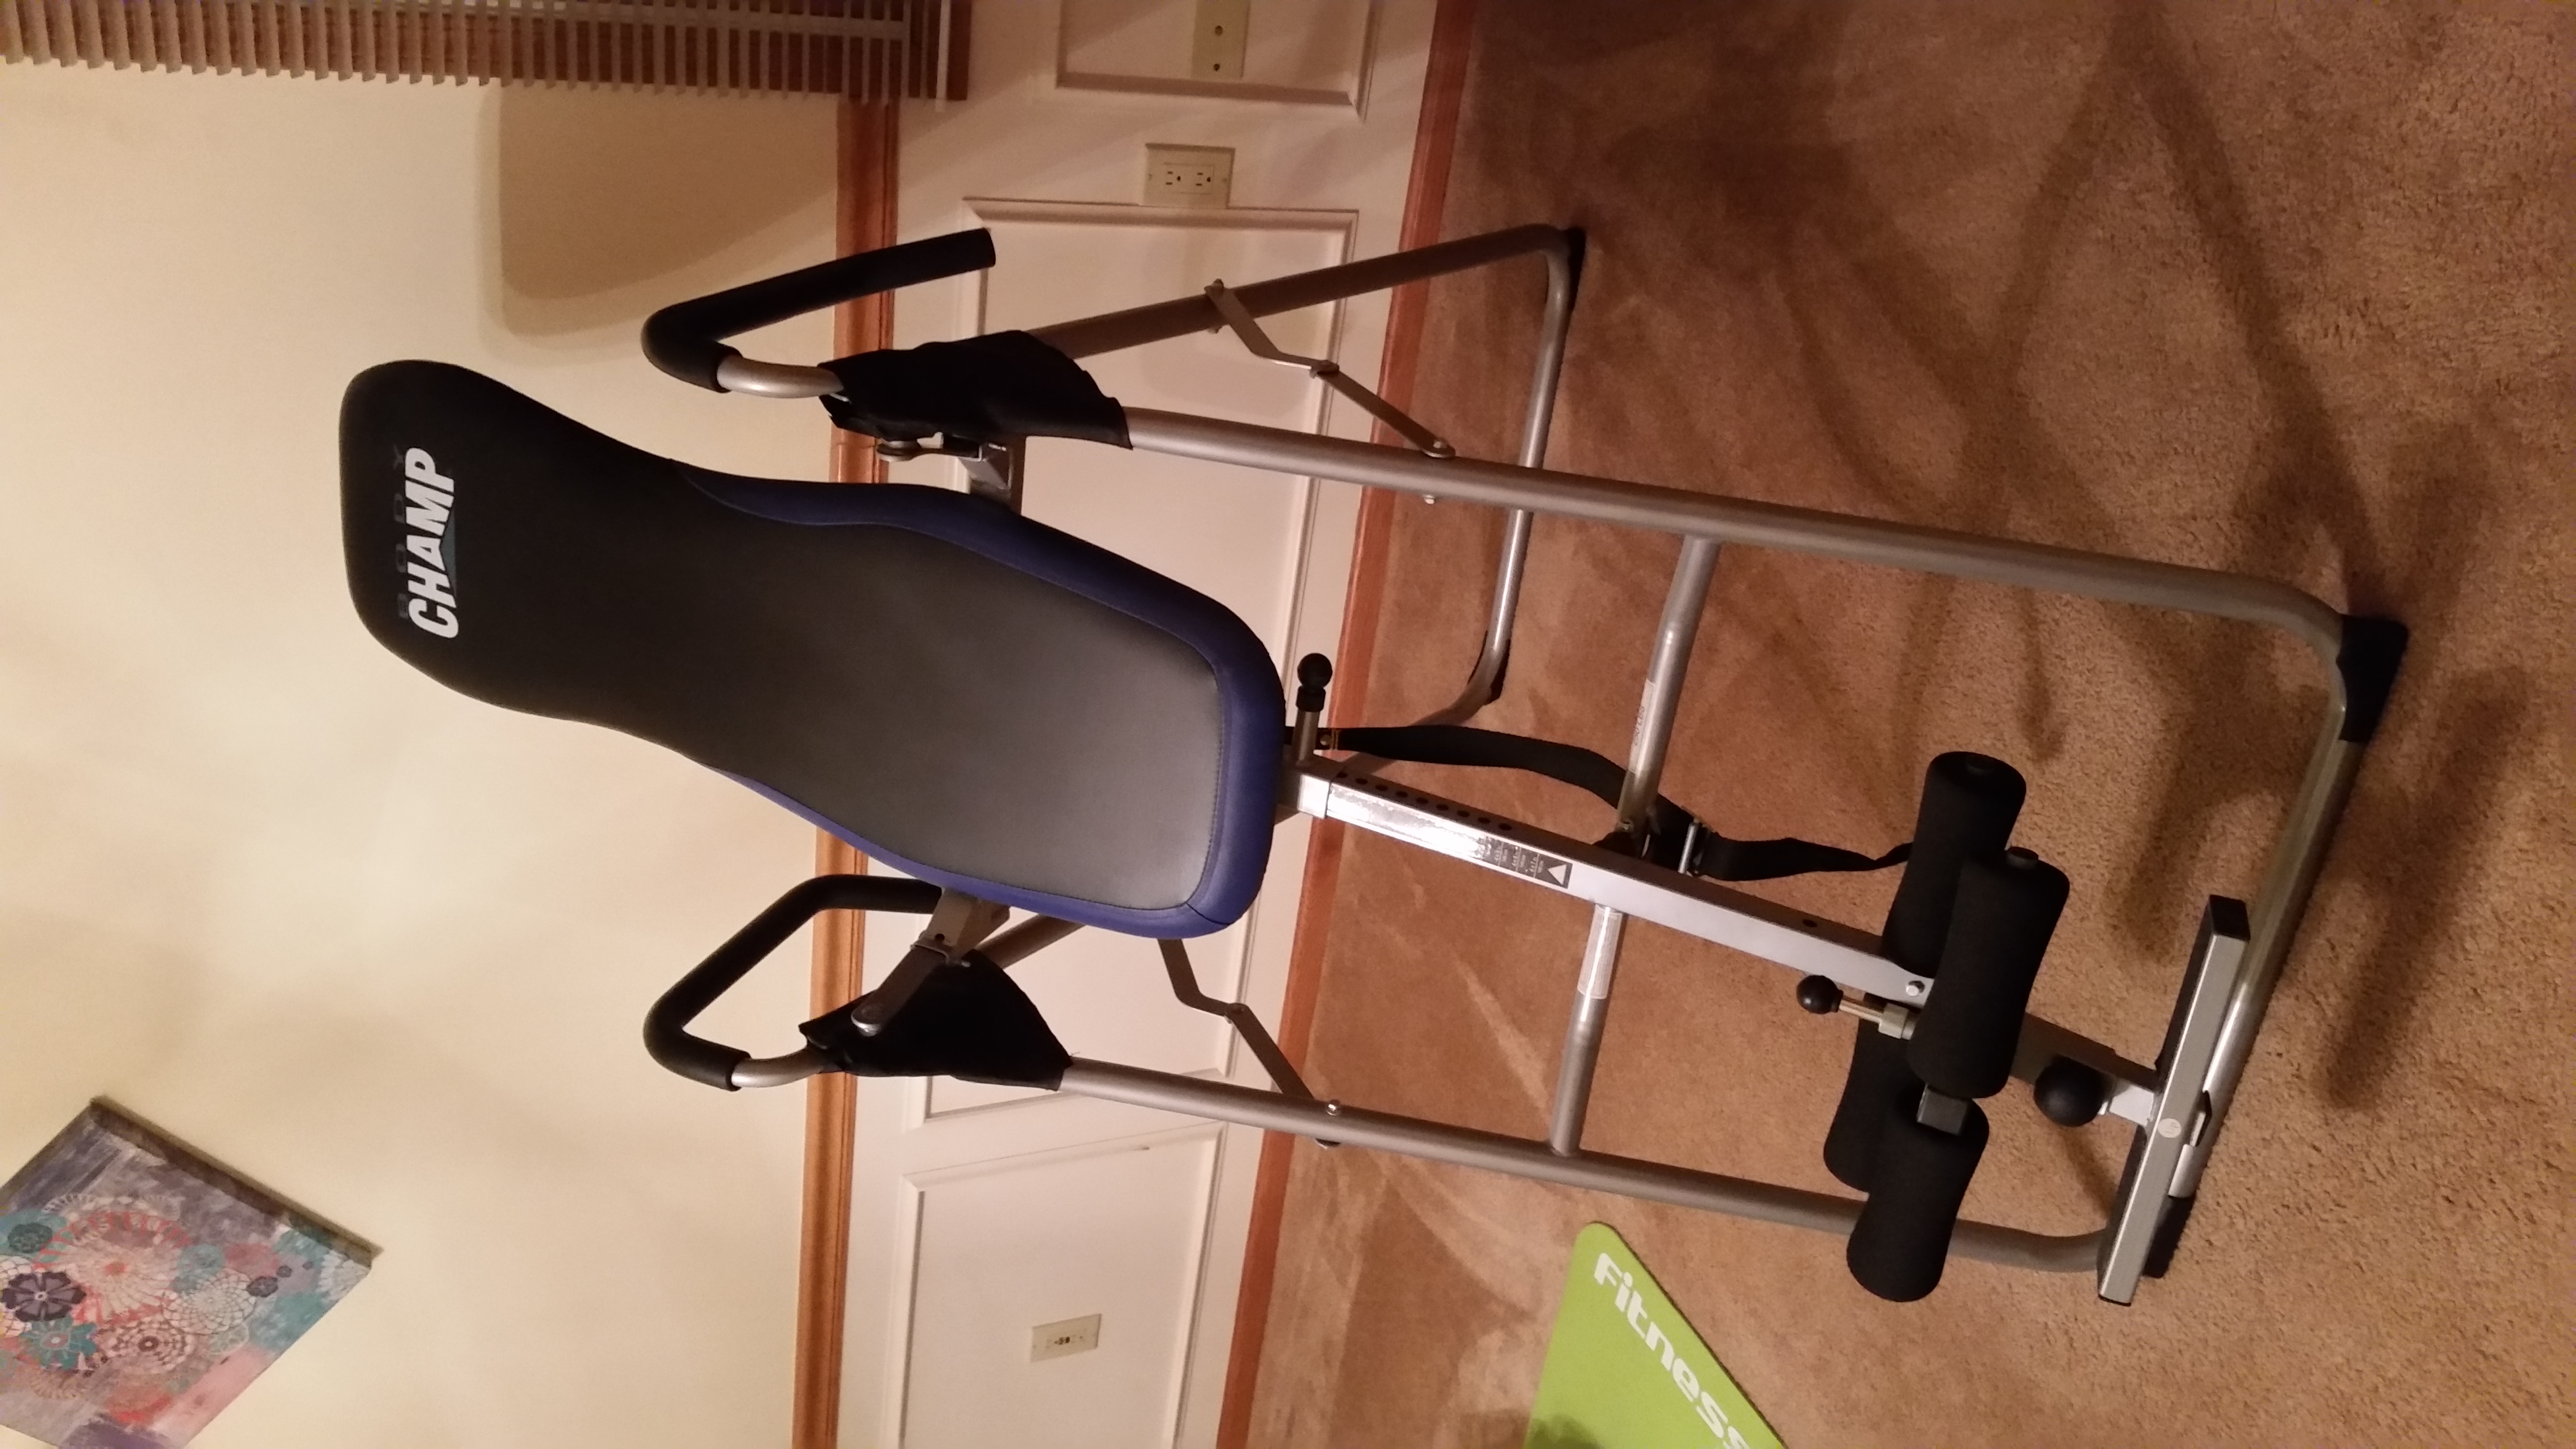 Body Champ Inversion Therapy Table for sale in Mentor OH